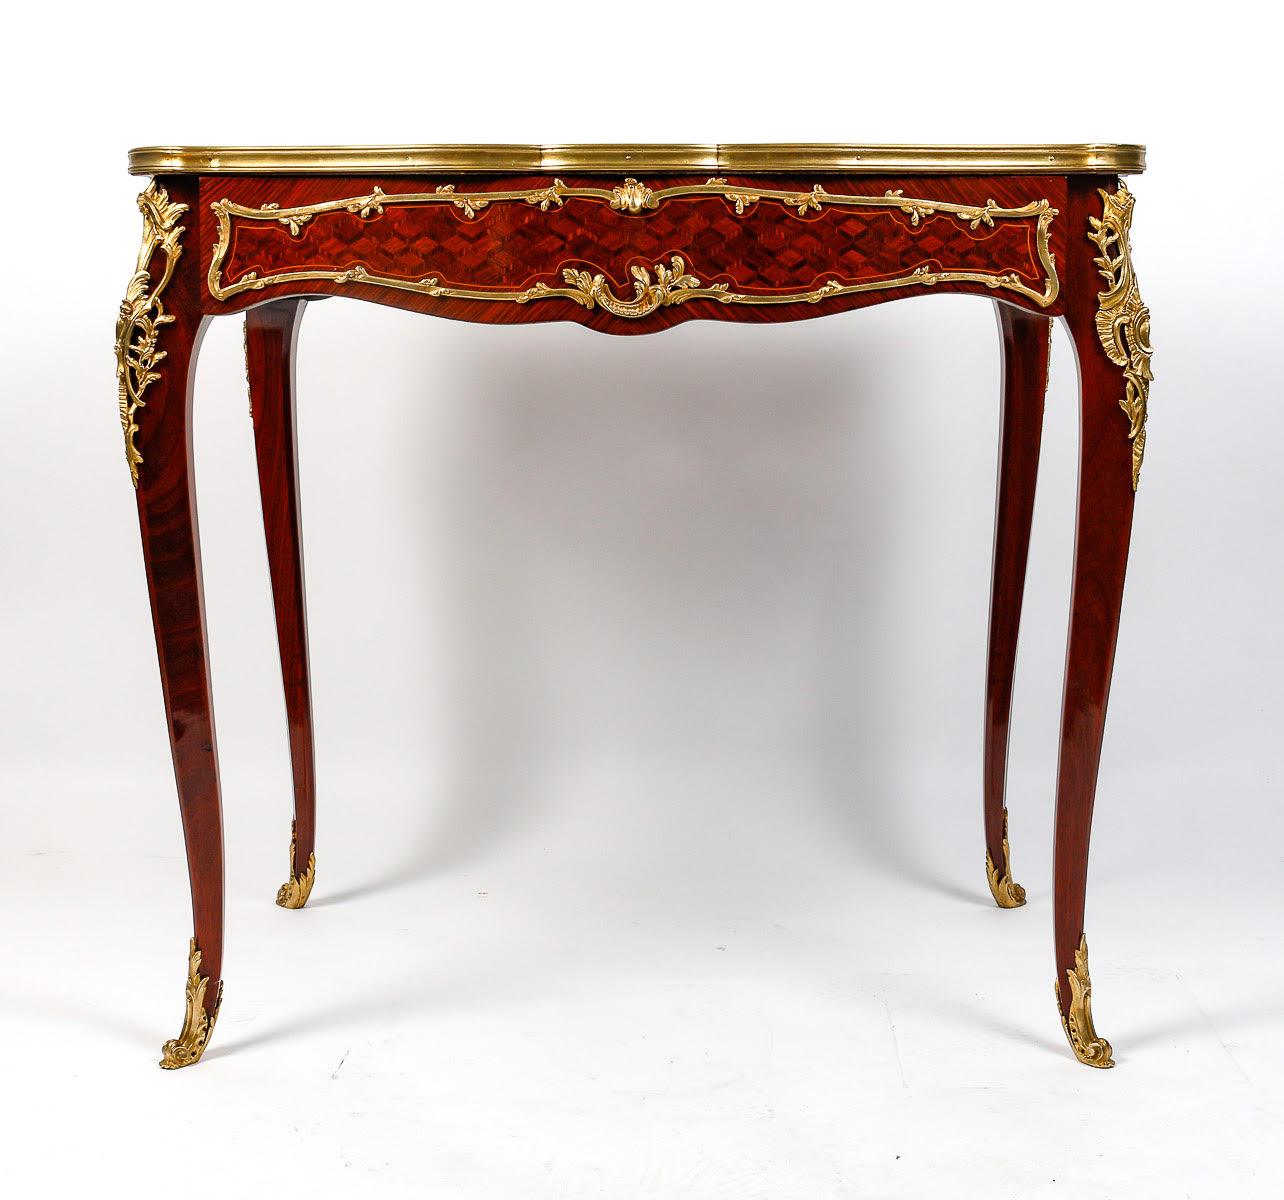 Louis XV style desk and side table, 19th century.

Louis XV style desk, side table, 19th century, Napoleon III period in precious wood marquetry and chased and gilded bronze, 1 large drawer in the waist.    
h: 74cm , w: 81.5cm, d: 54cm